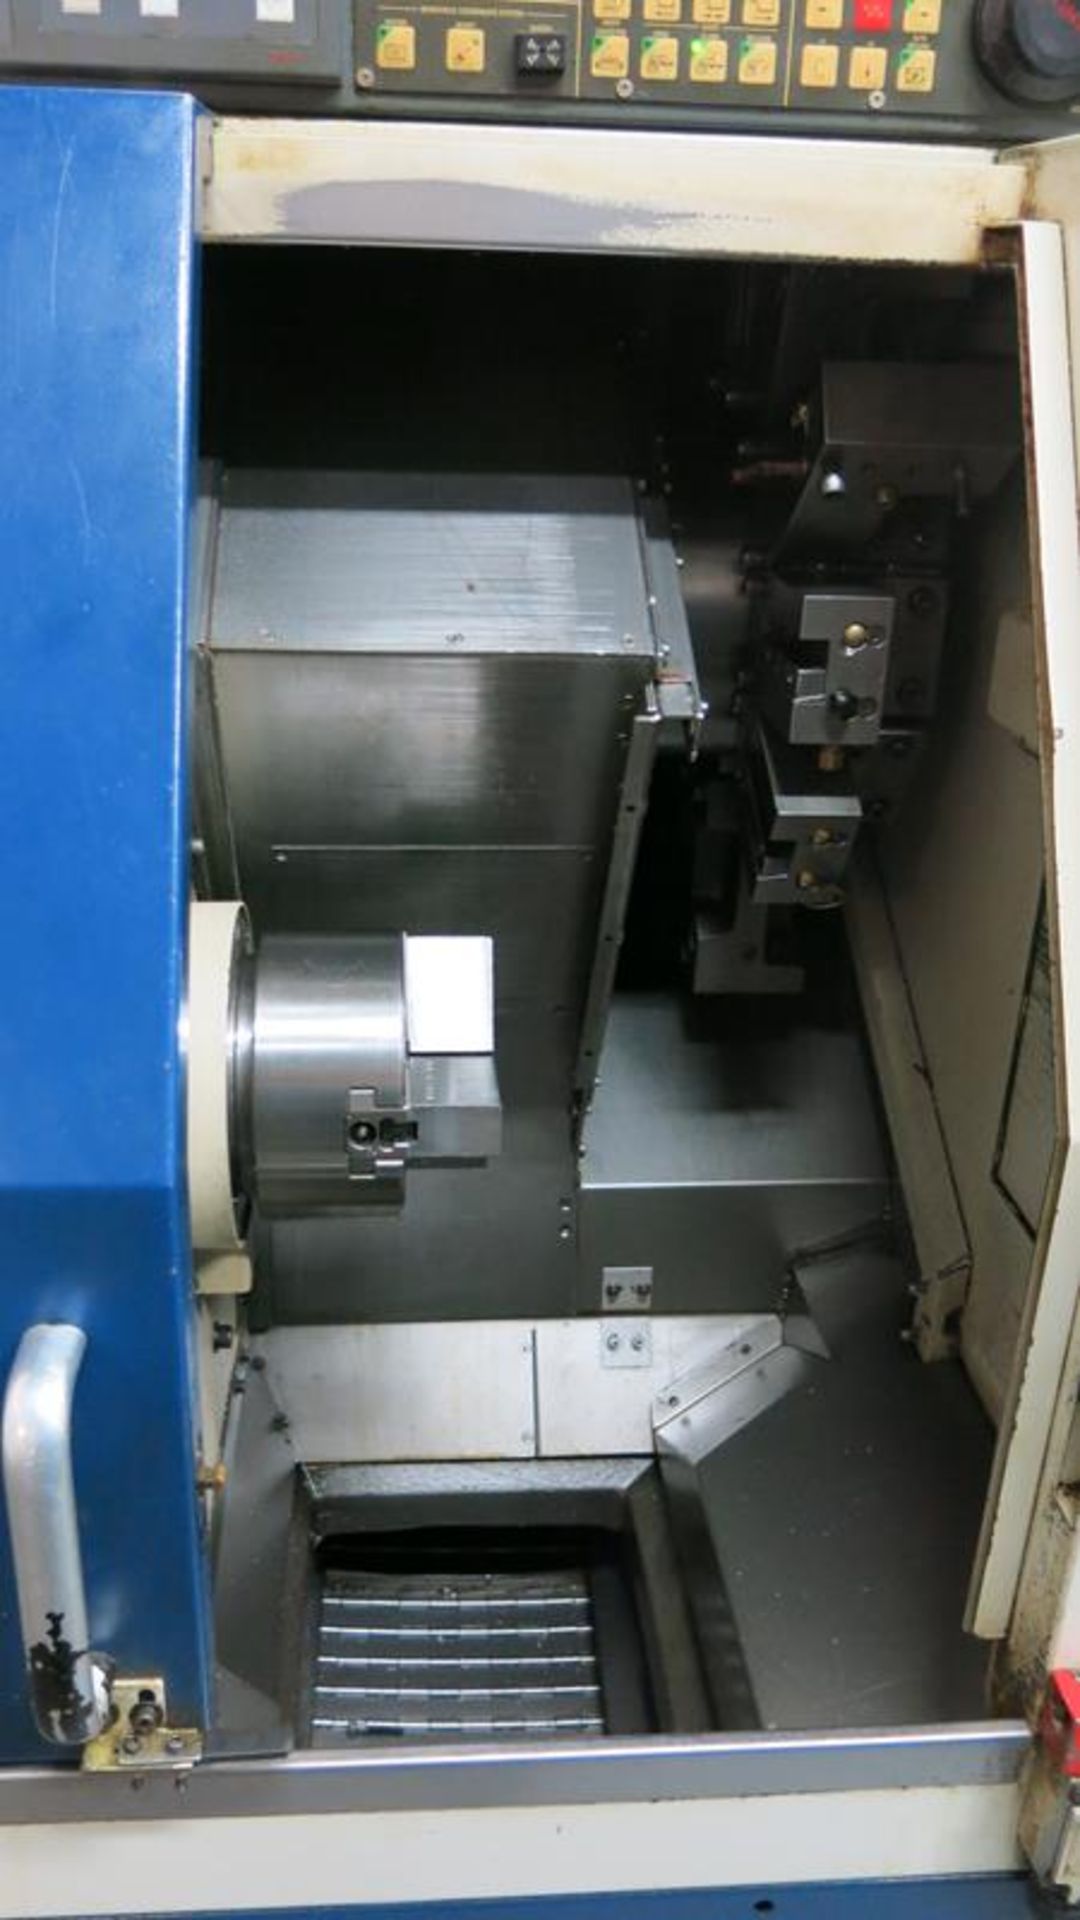 2012, TONGTAI MACHINE CO., HS-22, CNC PRECISION LATHE, 15 HP SPINDLE, 6000 RPM SPINDLE, 6" DIA 3 JAW - Image 5 of 9